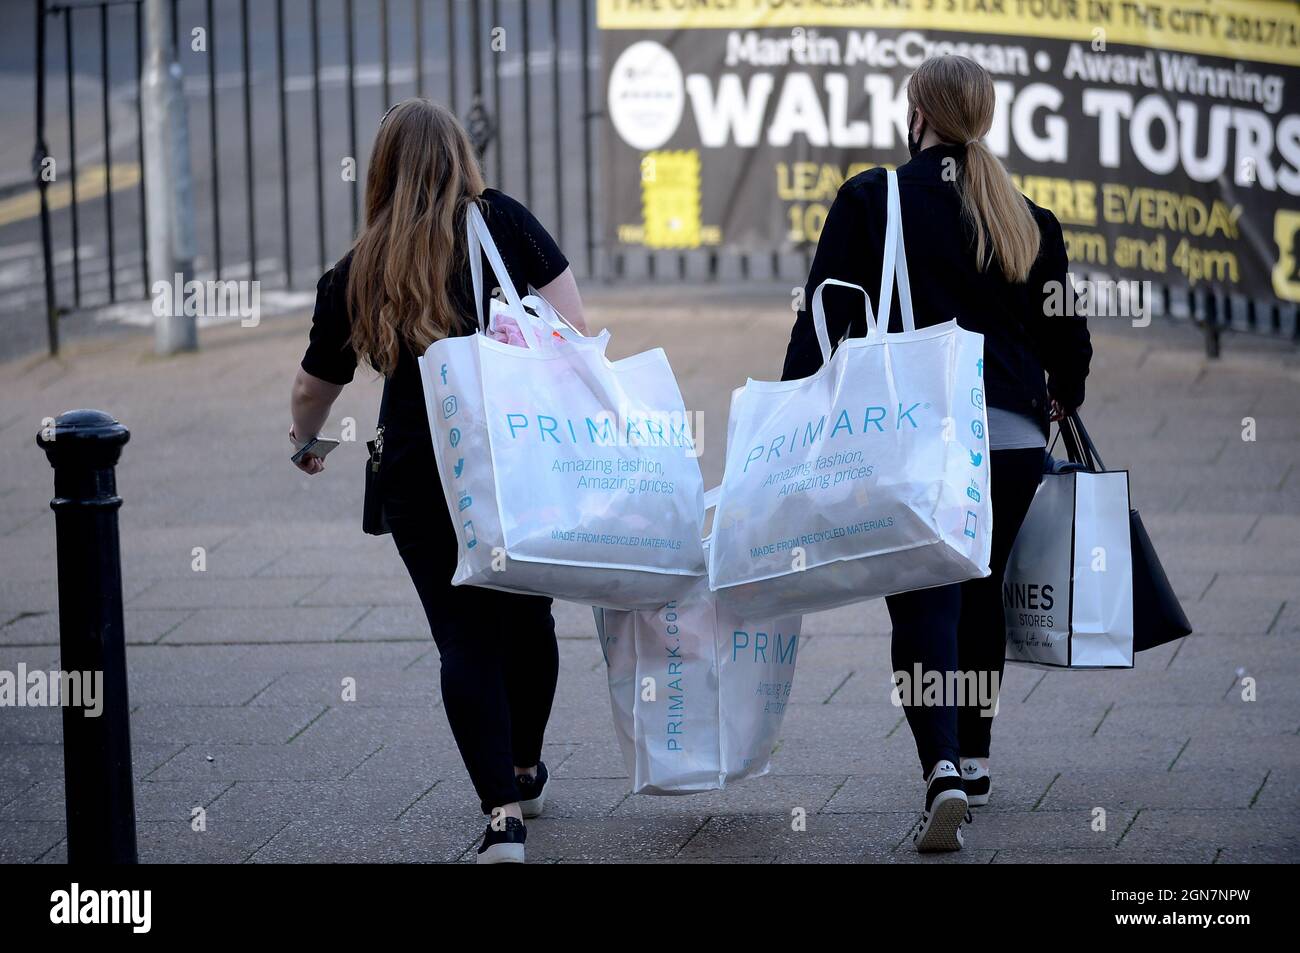 Shoppers with Primark bags in Derry, Londonderry, Northern Ireland. ©George Sweeney / Alamy Stock Photo Stock Photo